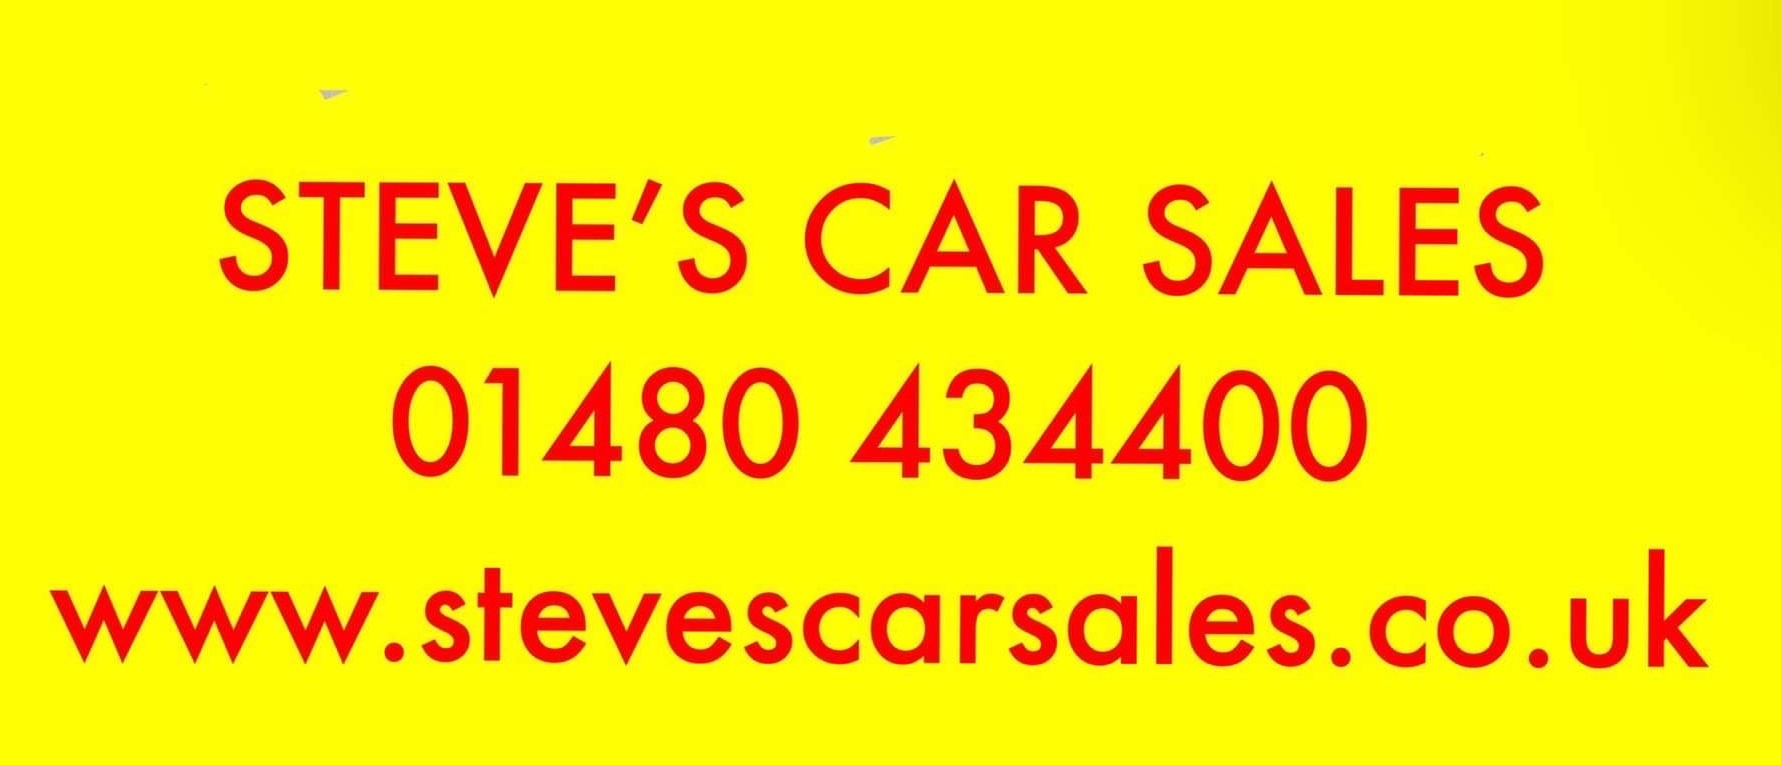 We are proud to say that Steve's Car Sales kindly sponsors Sawtry and District Bowls Club